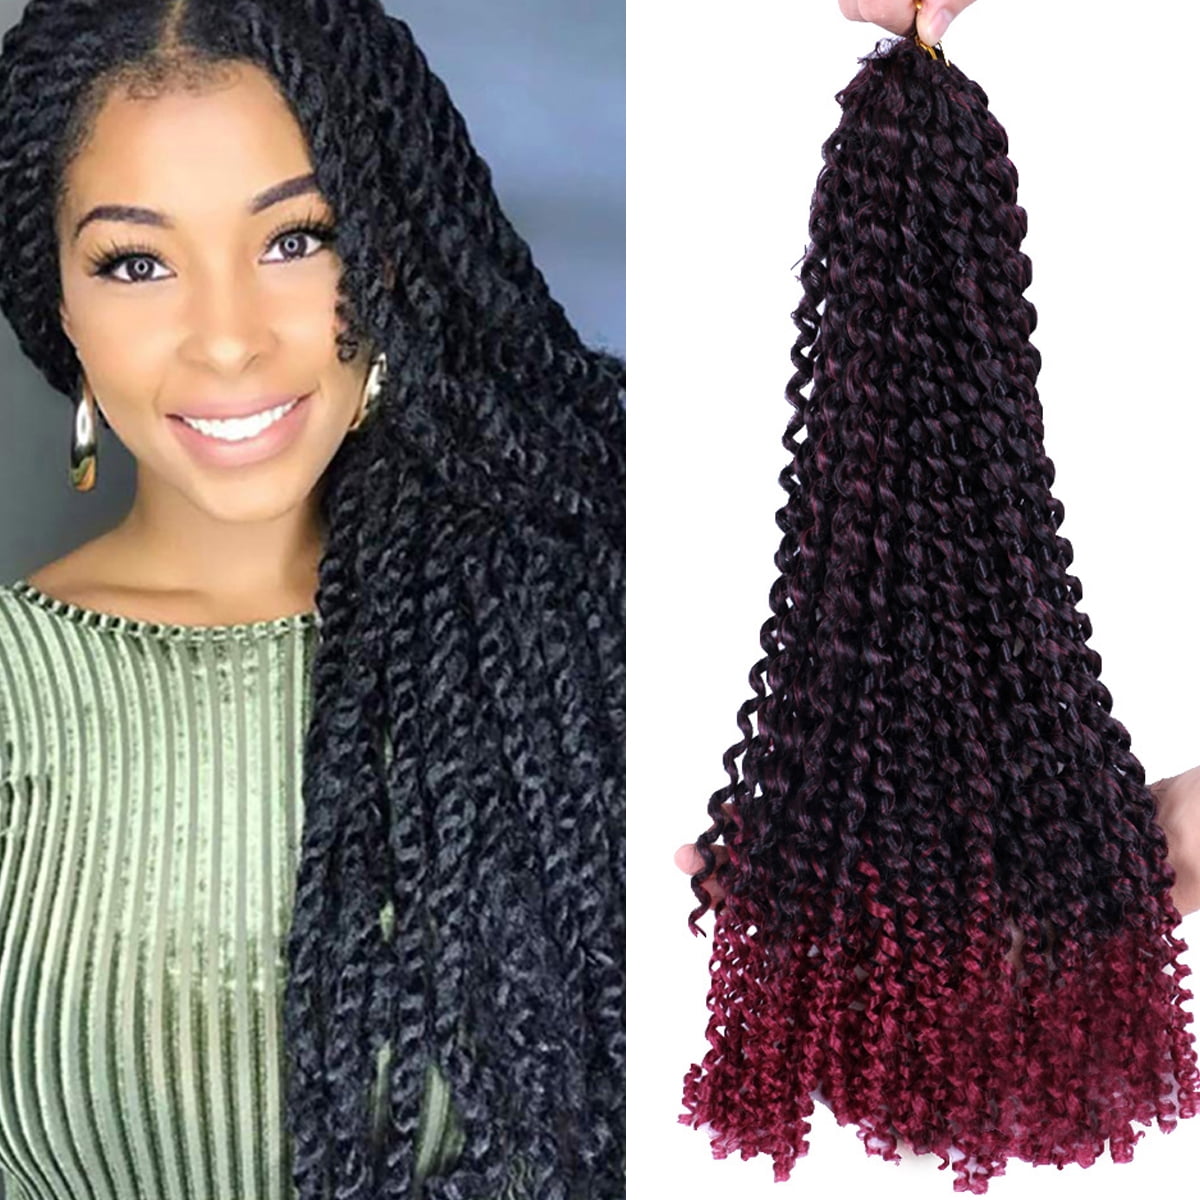 Travelwant Crochet Box Braids Hair with Curly Ends Prelooped